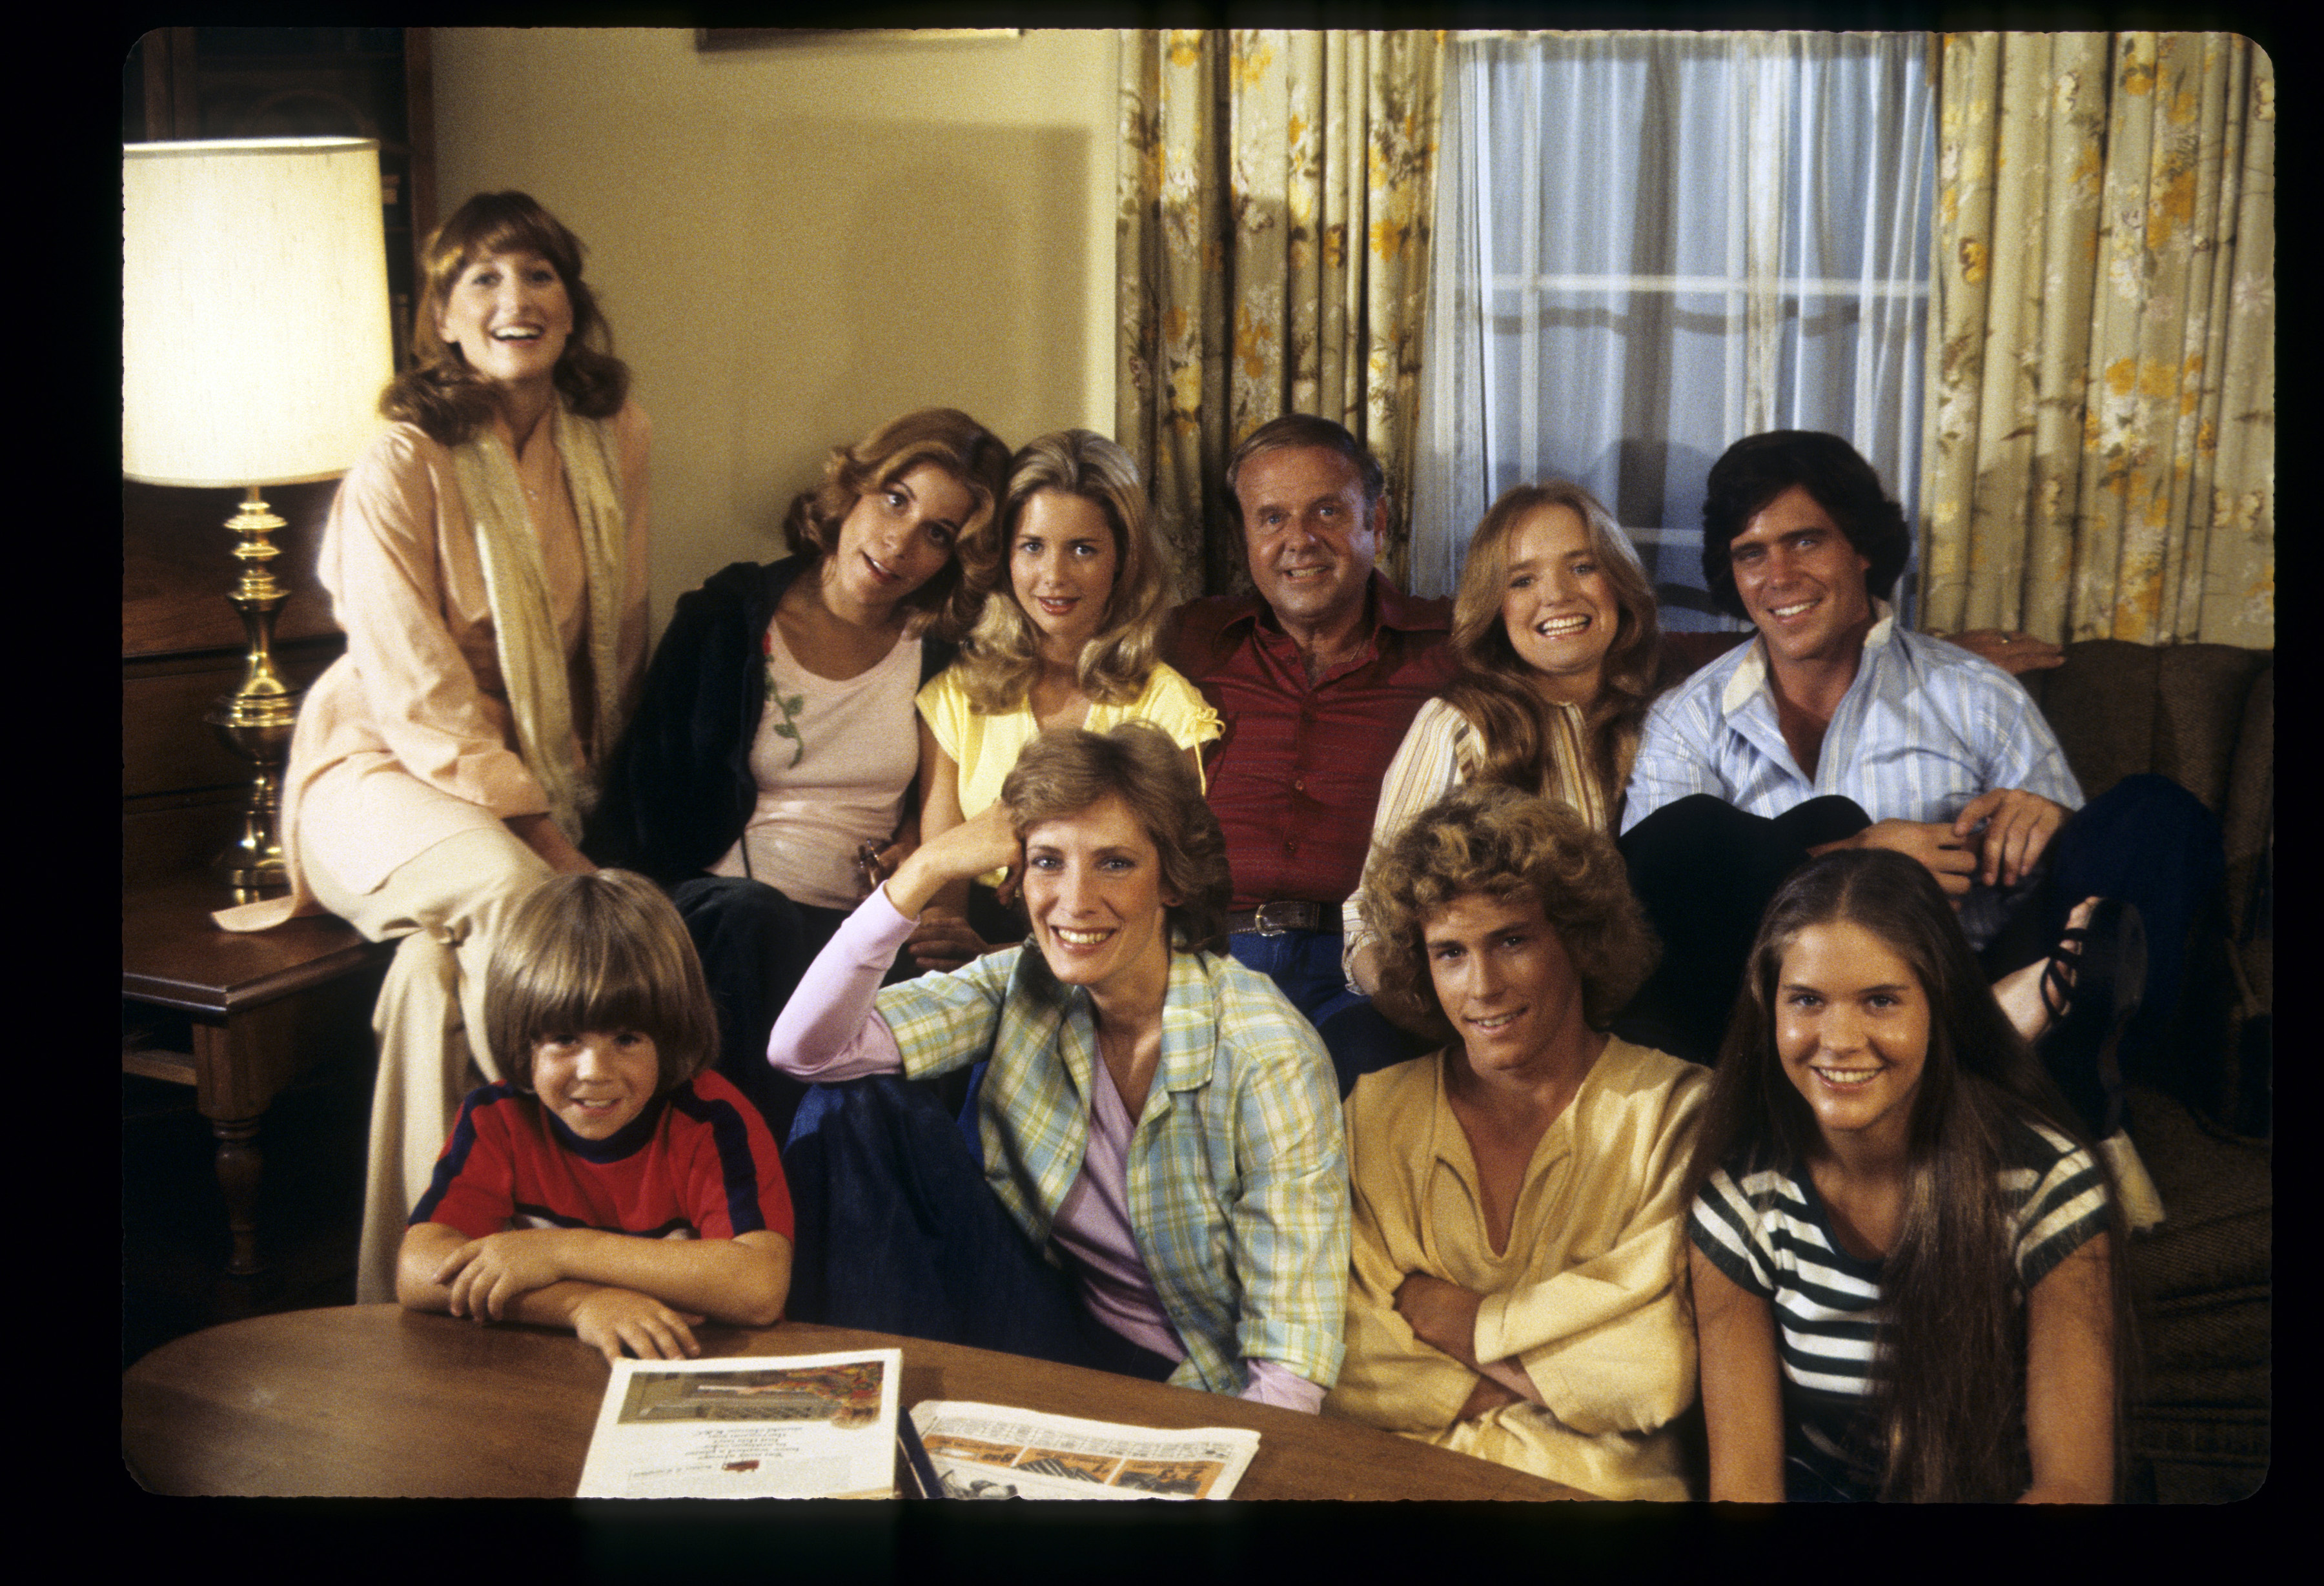 Adam Rich, Betty Buckley, Willie Aames, Connie Newton Needham. Laurie Walters, Lani O'Grady, Dianne Kay, Dick Van Patten, Susan richardson, and Grant Goodeve on the set of "Eight is Enough" | Source: Getty Images